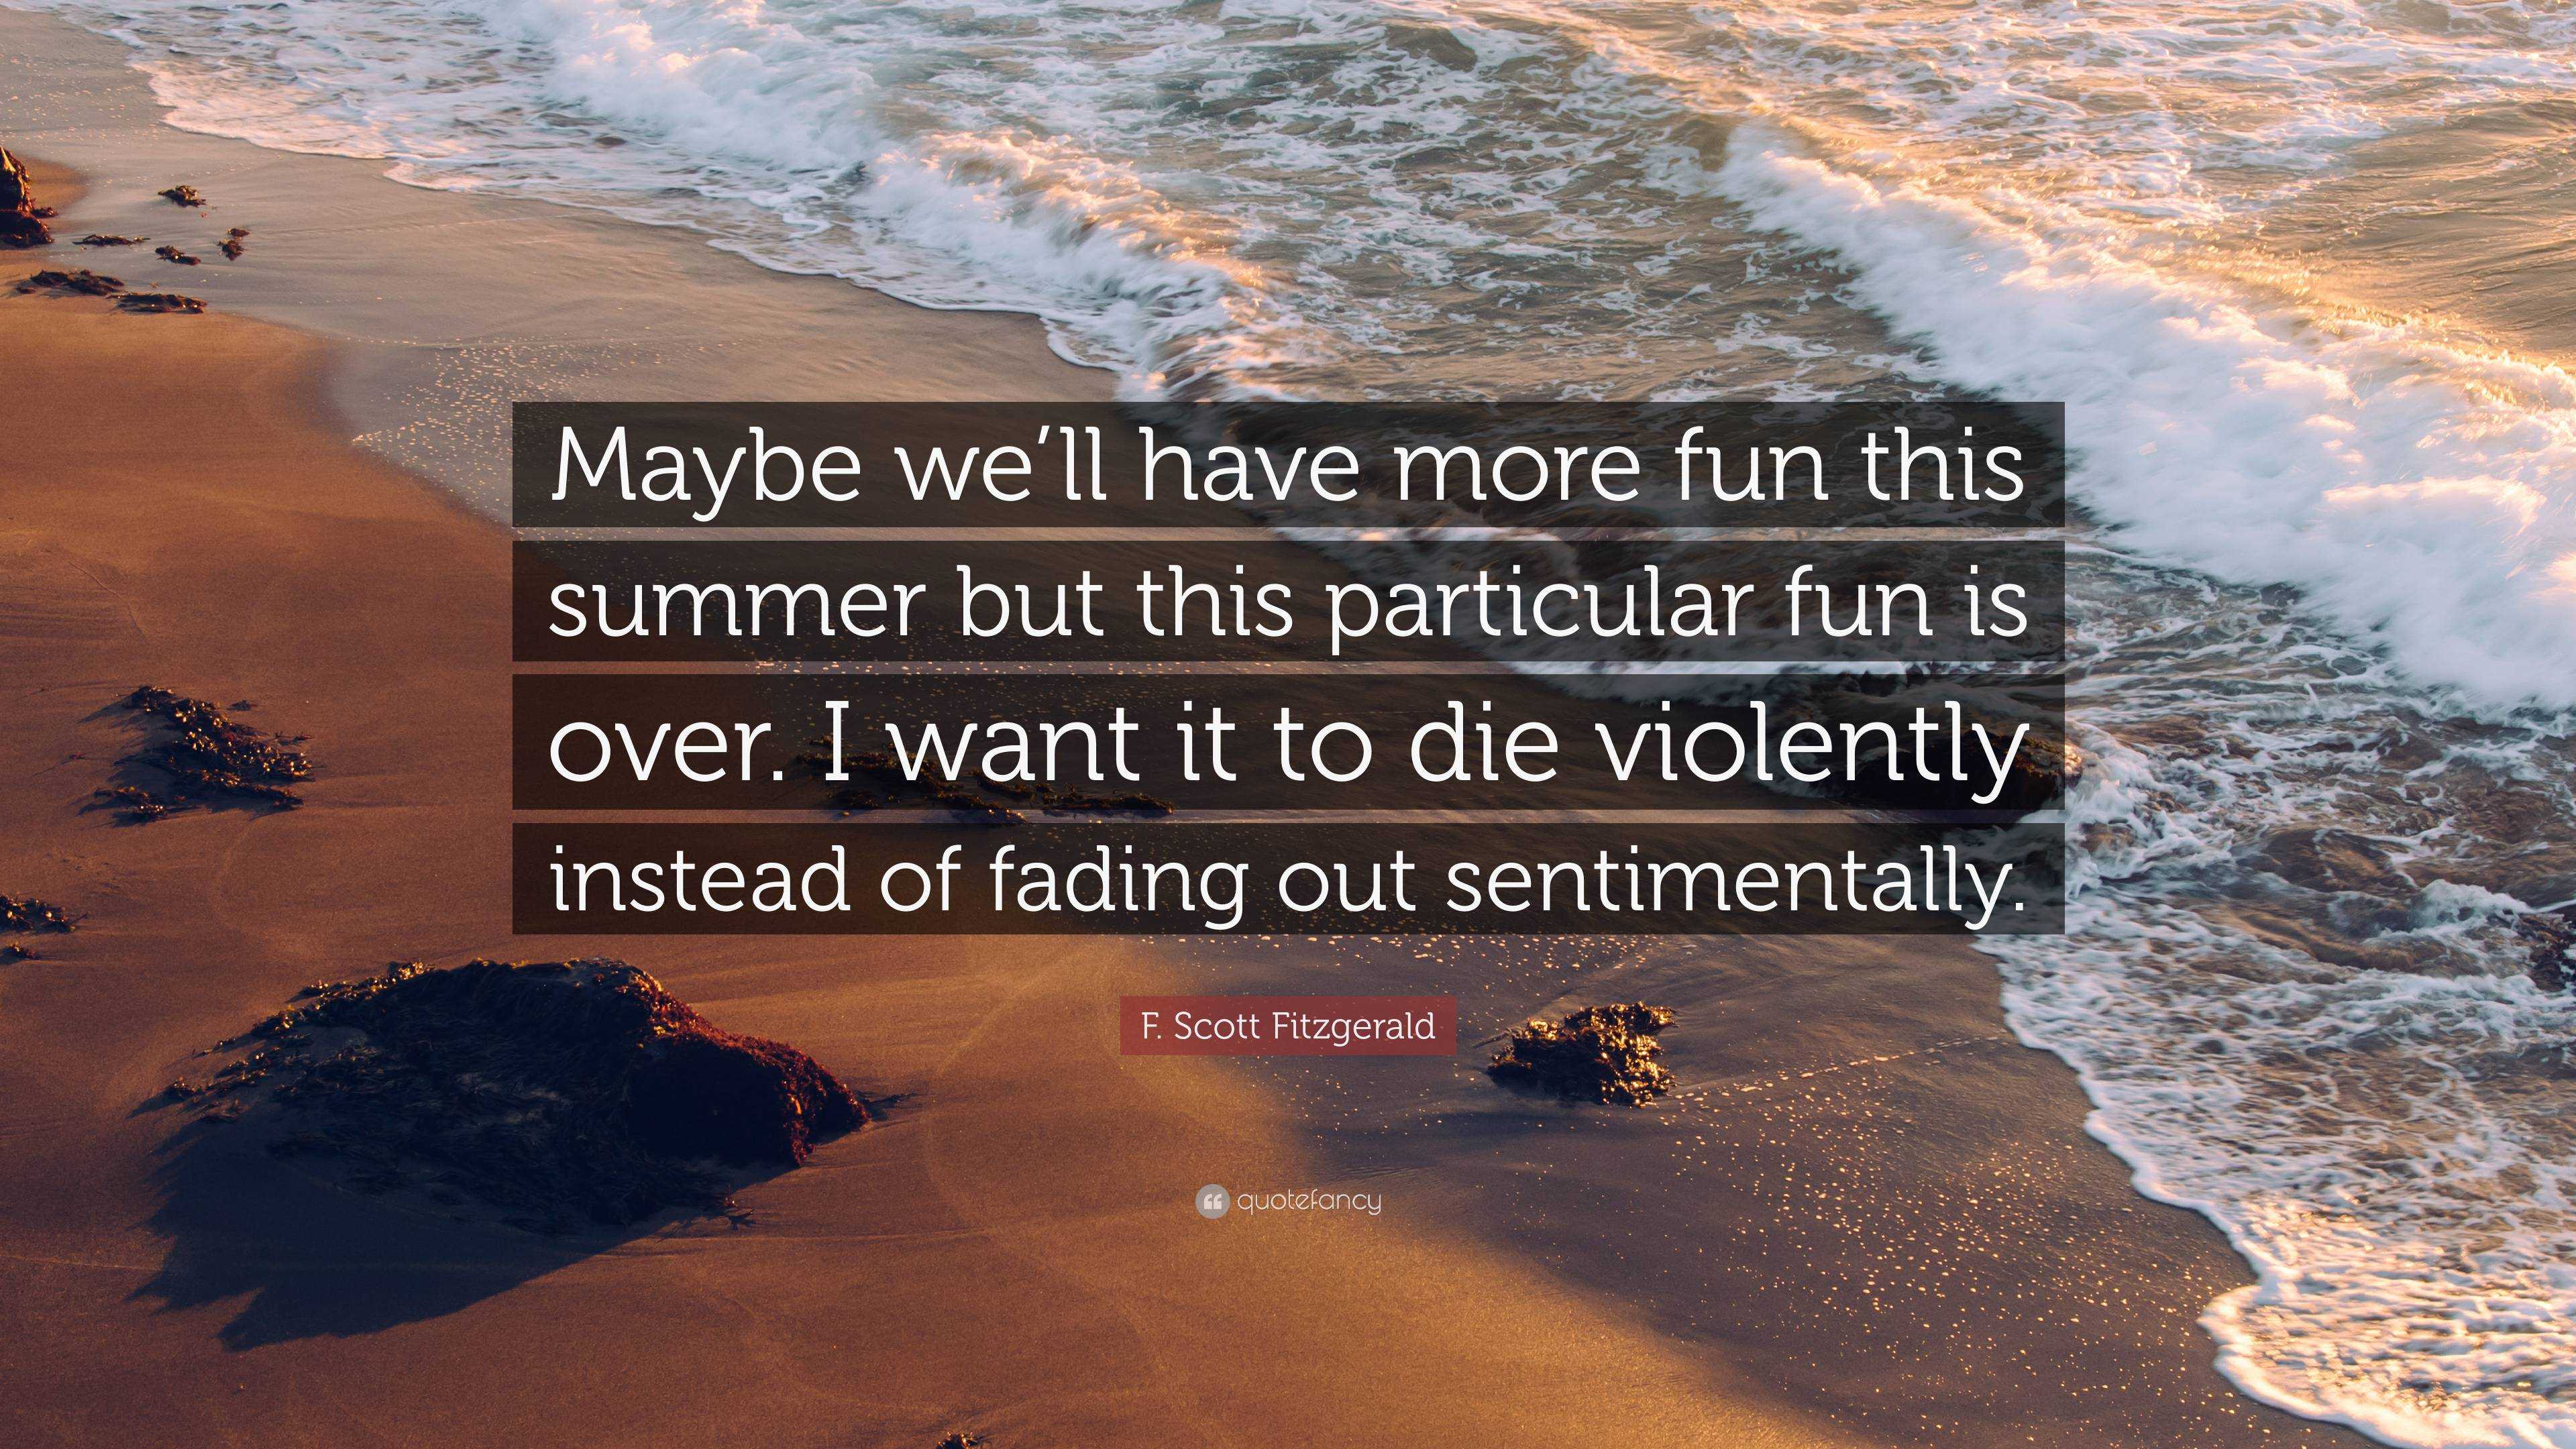 F. Scott Fitzgerald Quote: “Maybe We'll Have More Fun This Summer But This Particular Fun Is Over. I Want It To Die Violently Instead Of Fading Out ...”